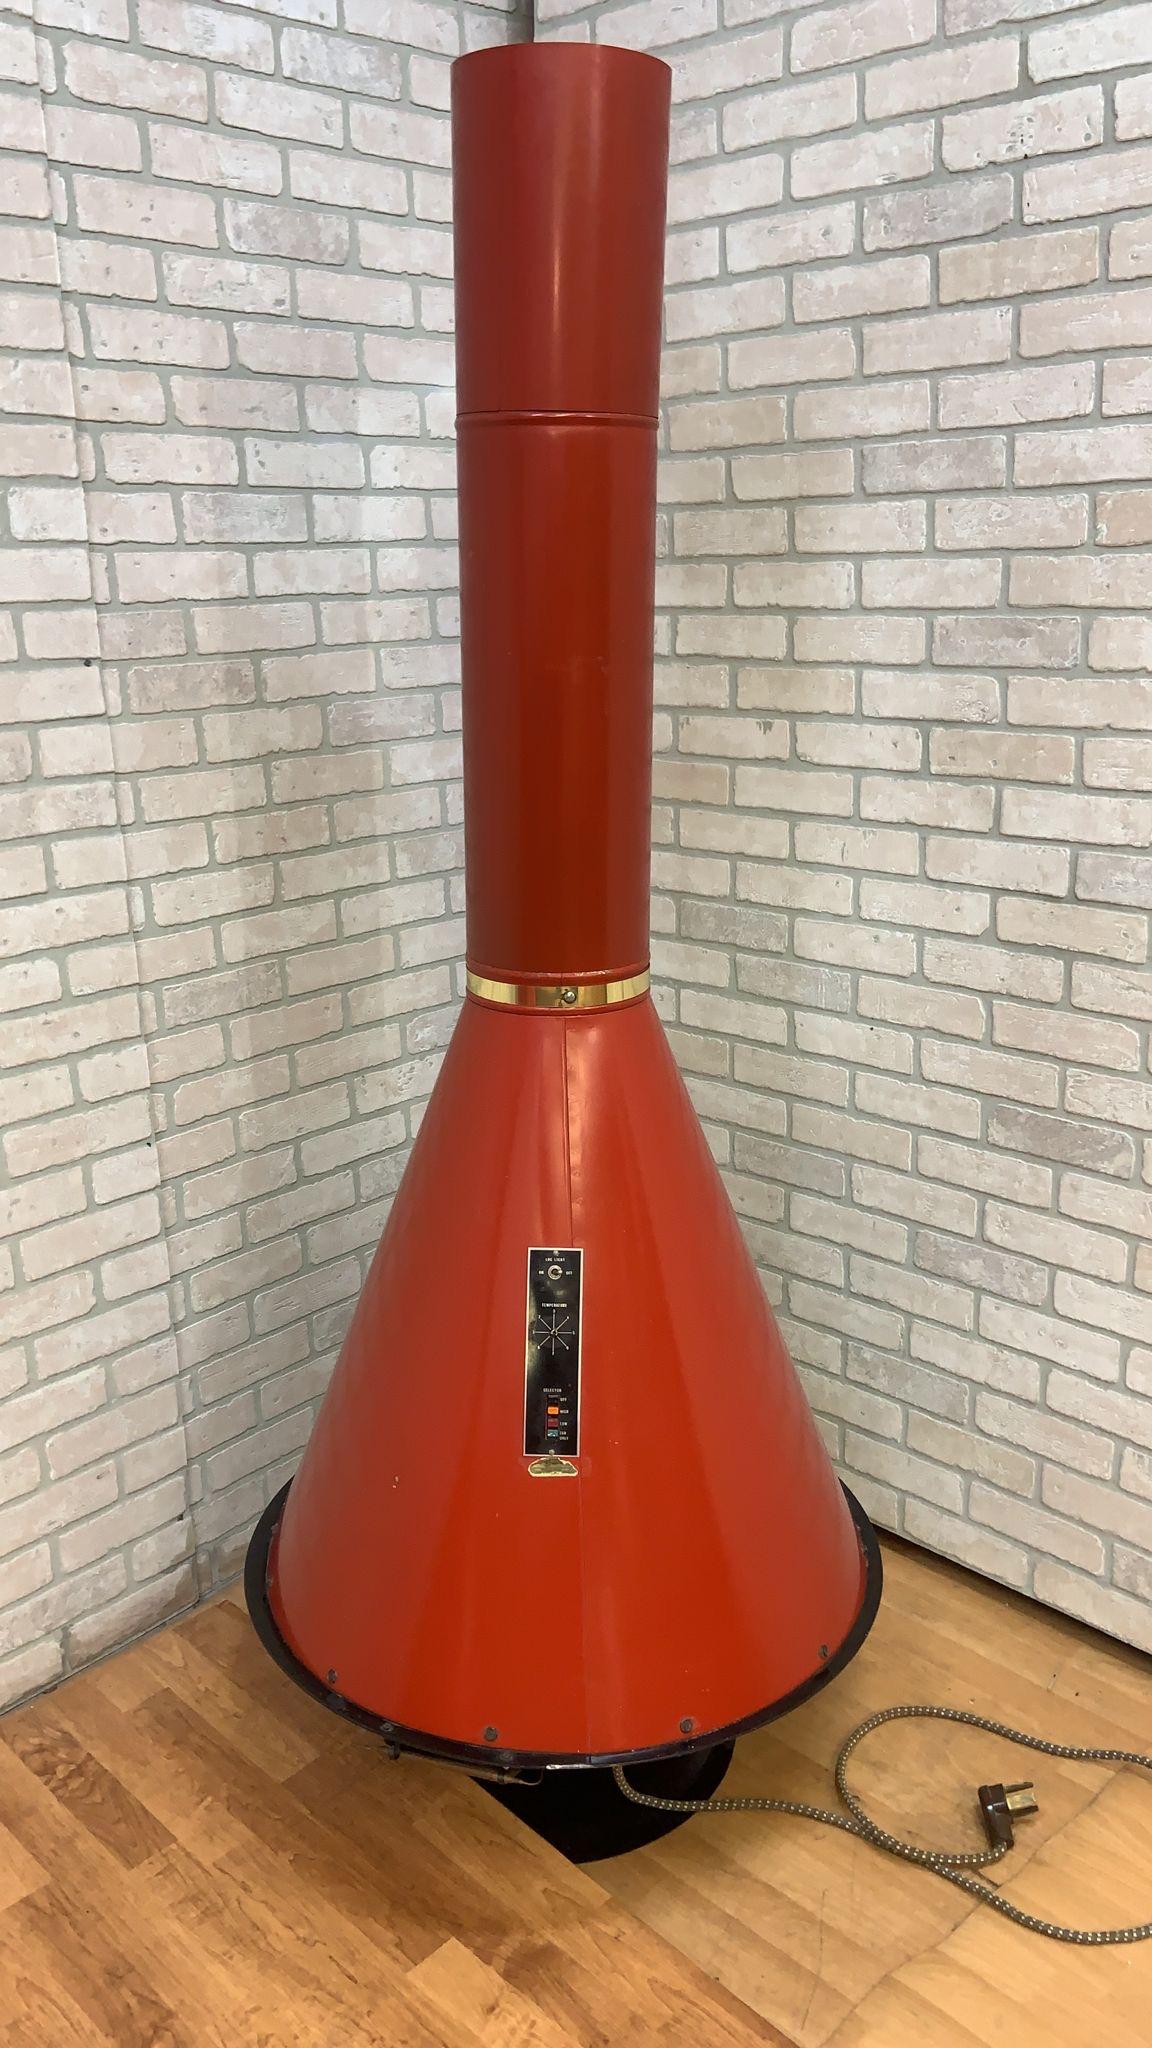 American Mid Century Modern Freestanding Electric Cone Fireplace in Red - Indoor/Outdoor